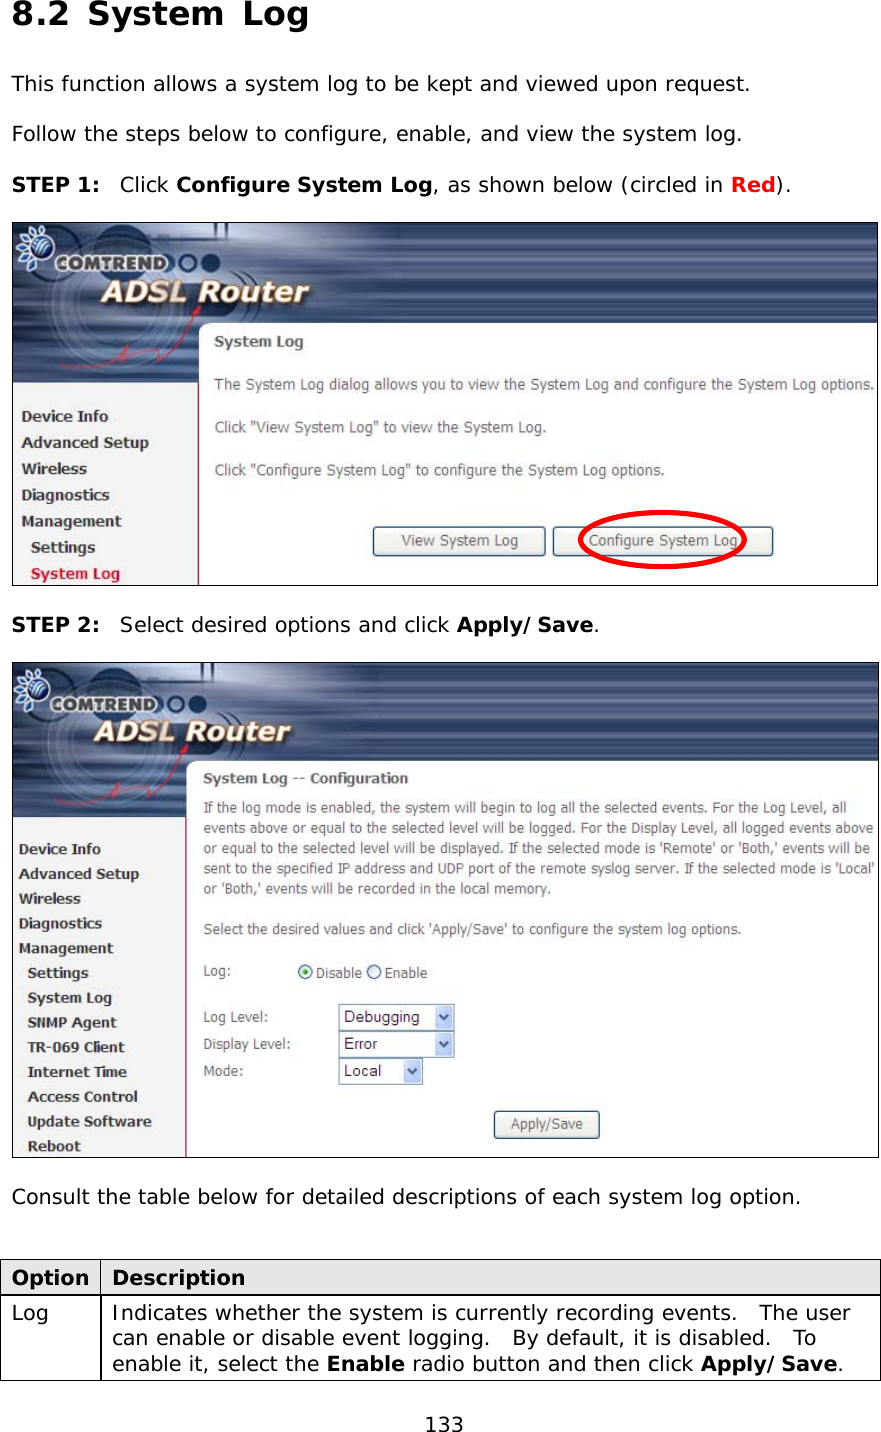  133 8.2 System Log This function allows a system log to be kept and viewed upon request.    Follow the steps below to configure, enable, and view the system log.  STEP 1:  Click Configure System Log, as shown below (circled in Red).    STEP 2:  Select desired options and click Apply/Save.    Consult the table below for detailed descriptions of each system log option.   Option  Description Log   Indicates whether the system is currently recording events.  The user can enable or disable event logging.  By default, it is disabled.  To enable it, select the Enable radio button and then click Apply/Save.   